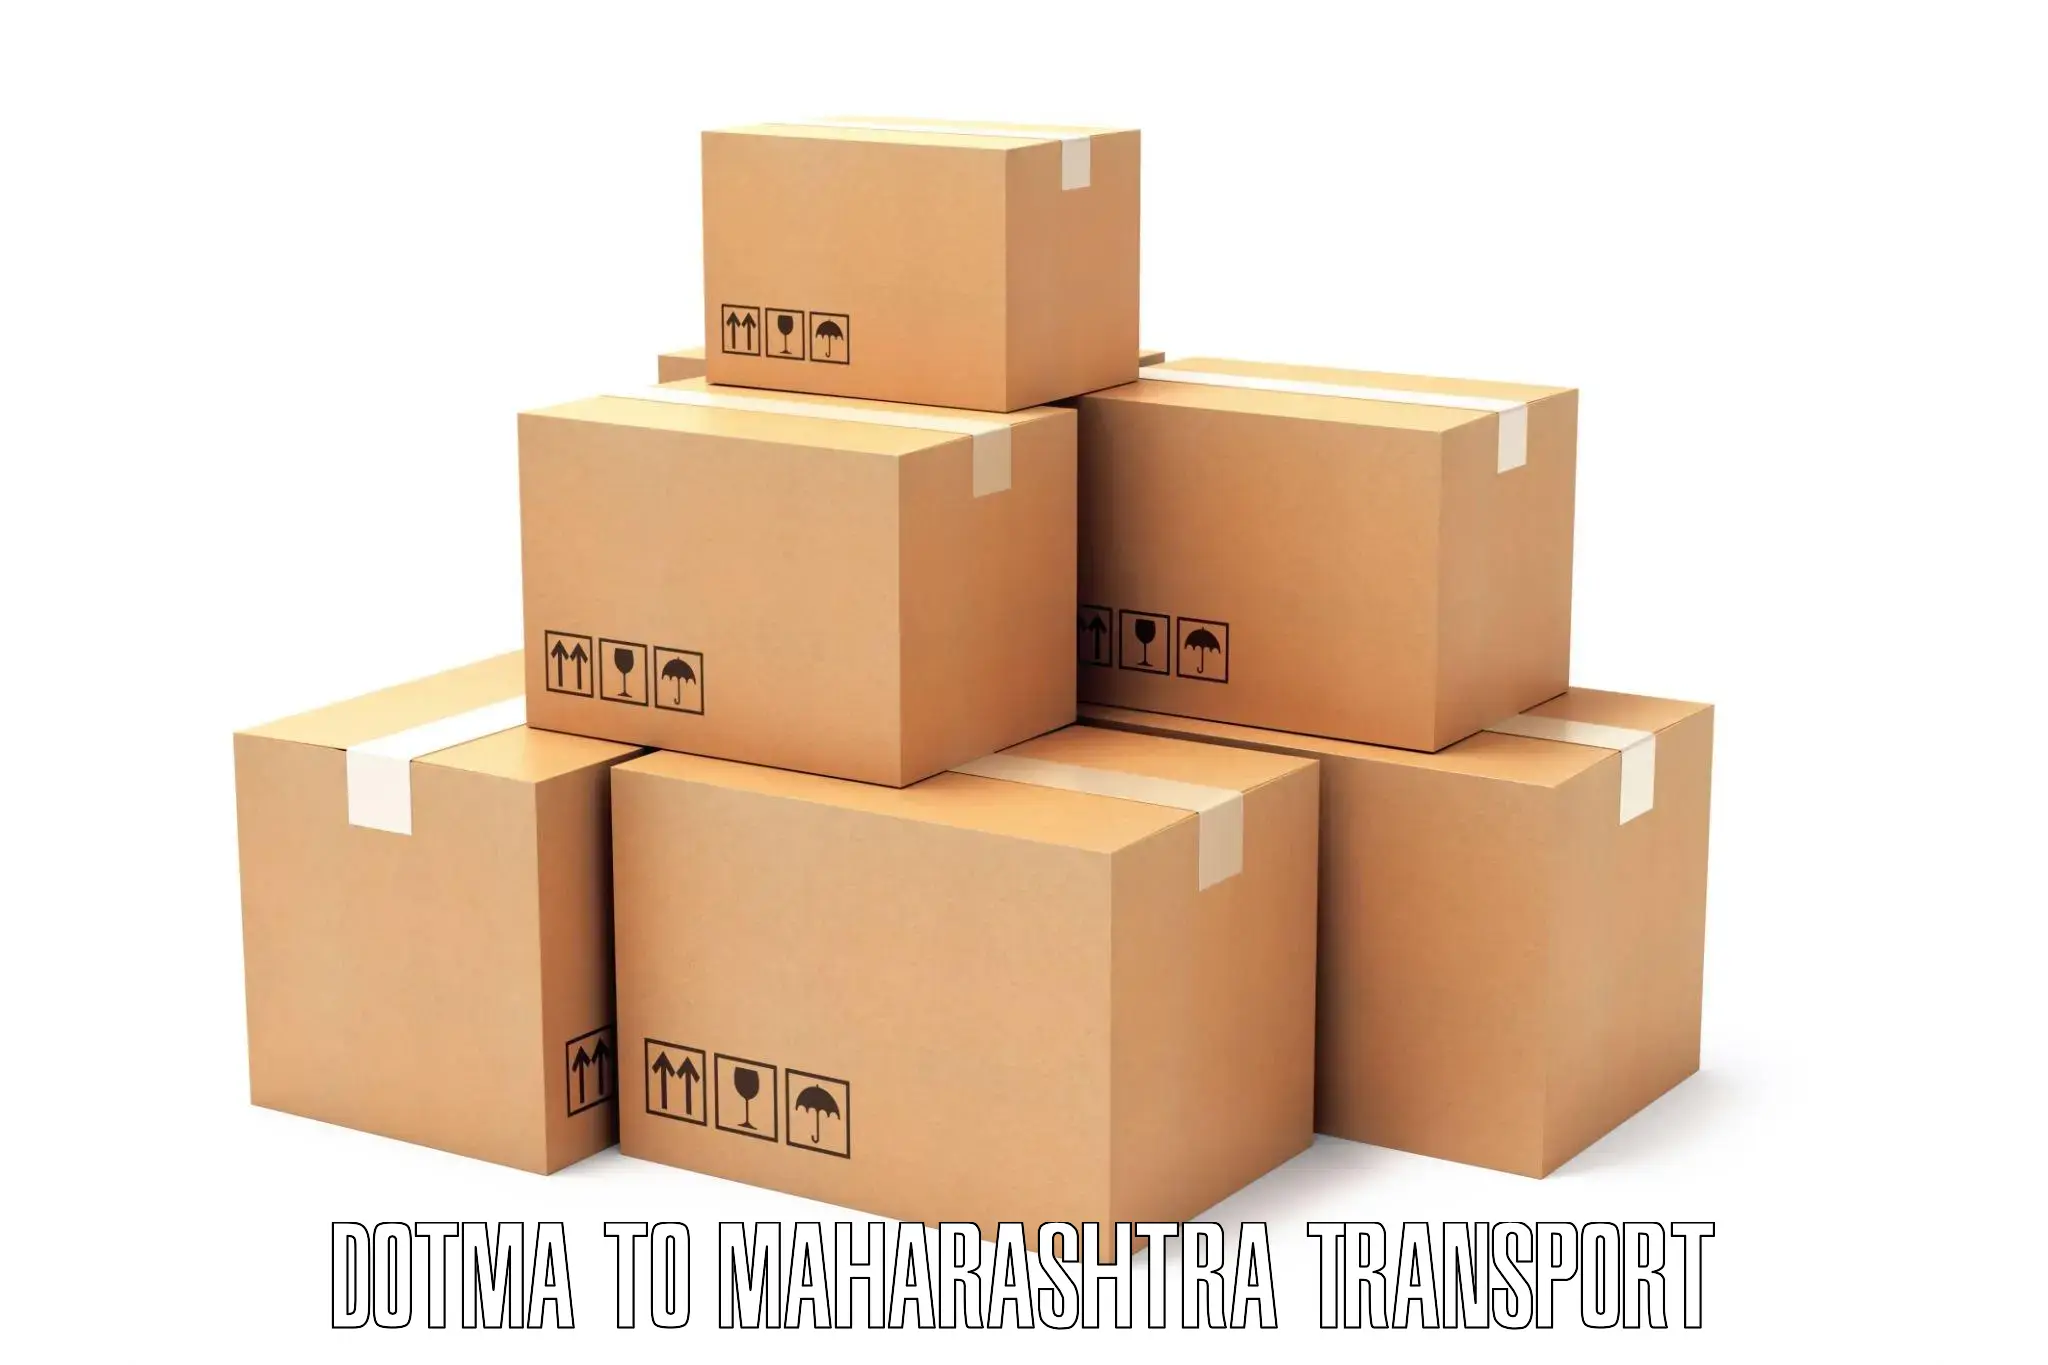 Cargo transport services Dotma to IIIT Pune